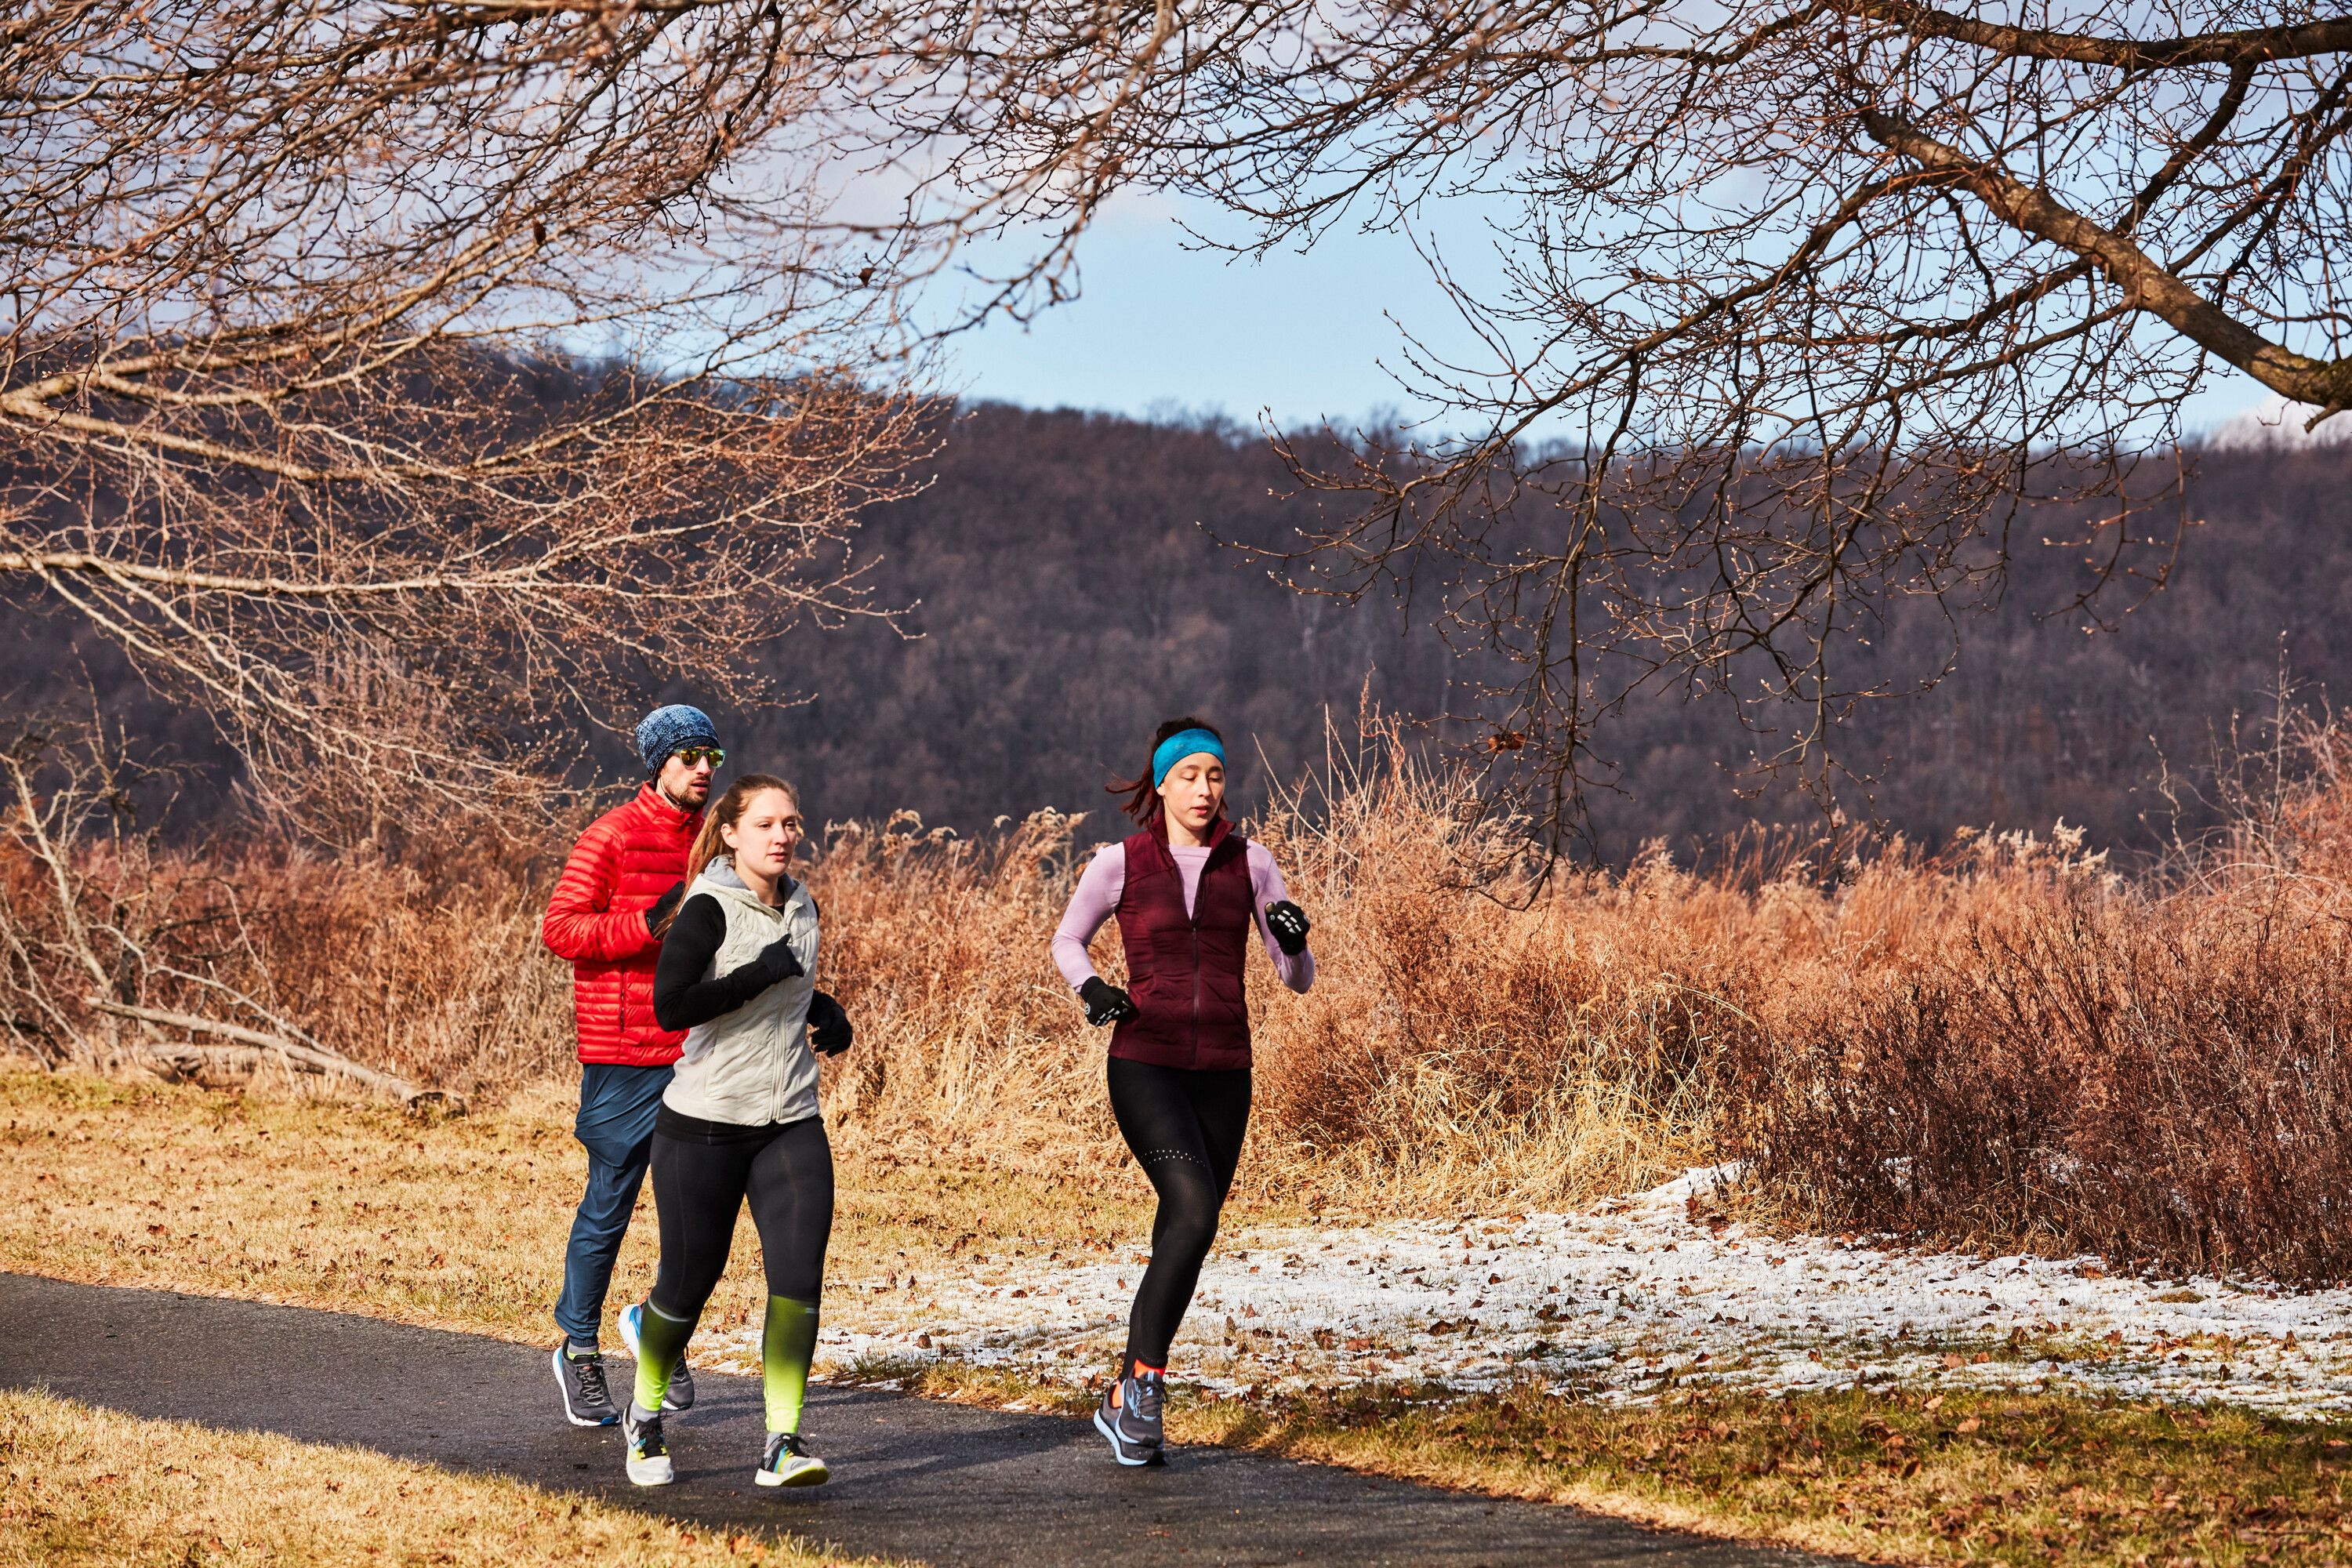 Running in Cold Weather Tips: How to Run Outside in the Winter